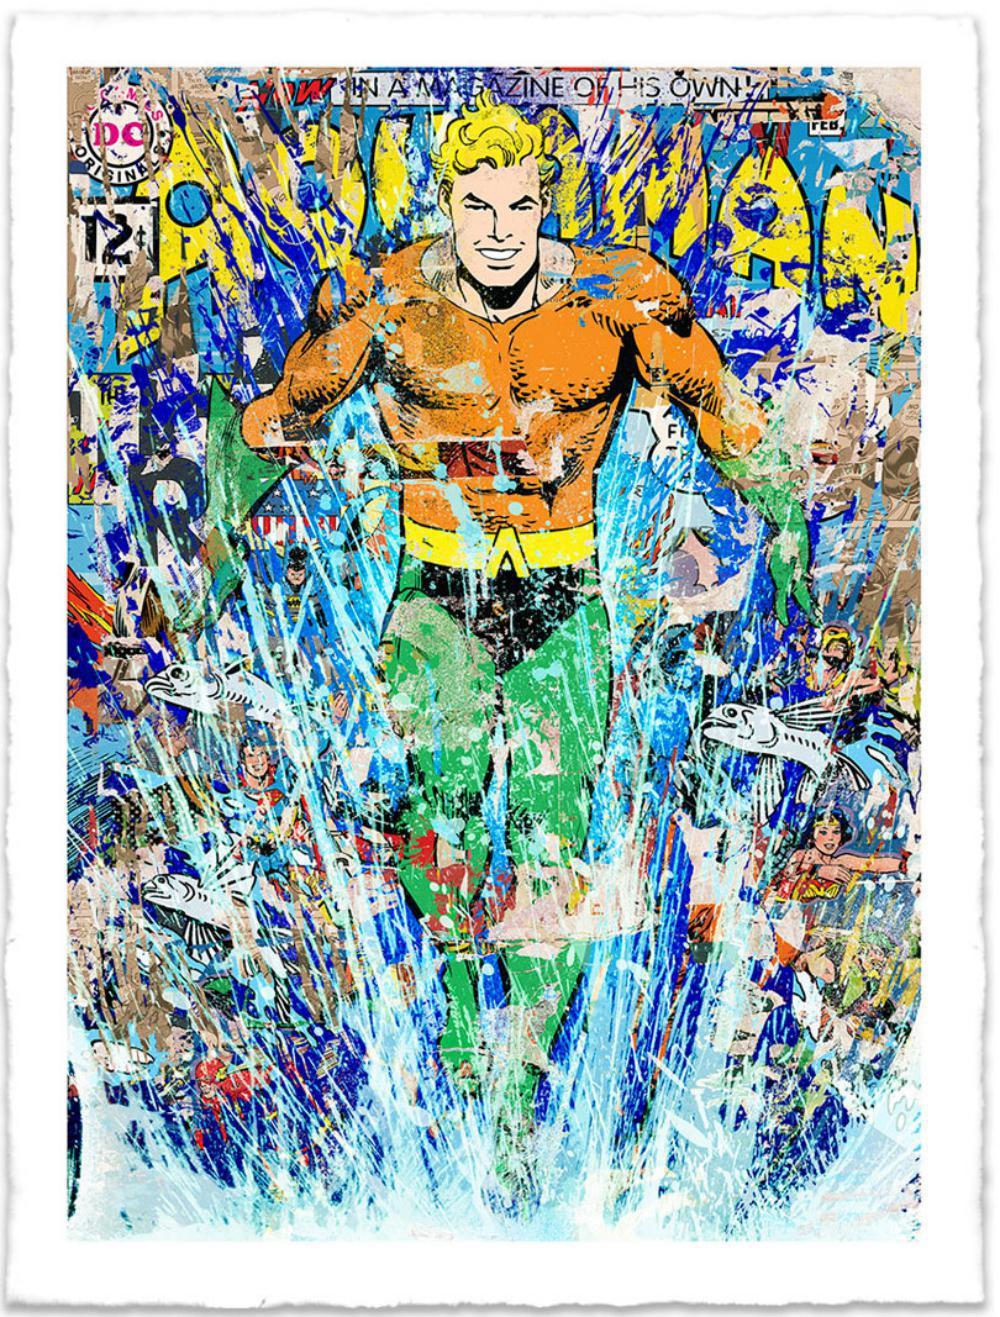 "Aquaman 2018"
2018
Mr. Brainwash
Limited Edition Print
Screen Print on Torn Archival Art Paper
Size: 49 x 37 in    124 x 94 cm
Edition: From the edition of 100
Hand Signed : Hand Signed And Numbered By the Artist With a Thumb Print on the Back.